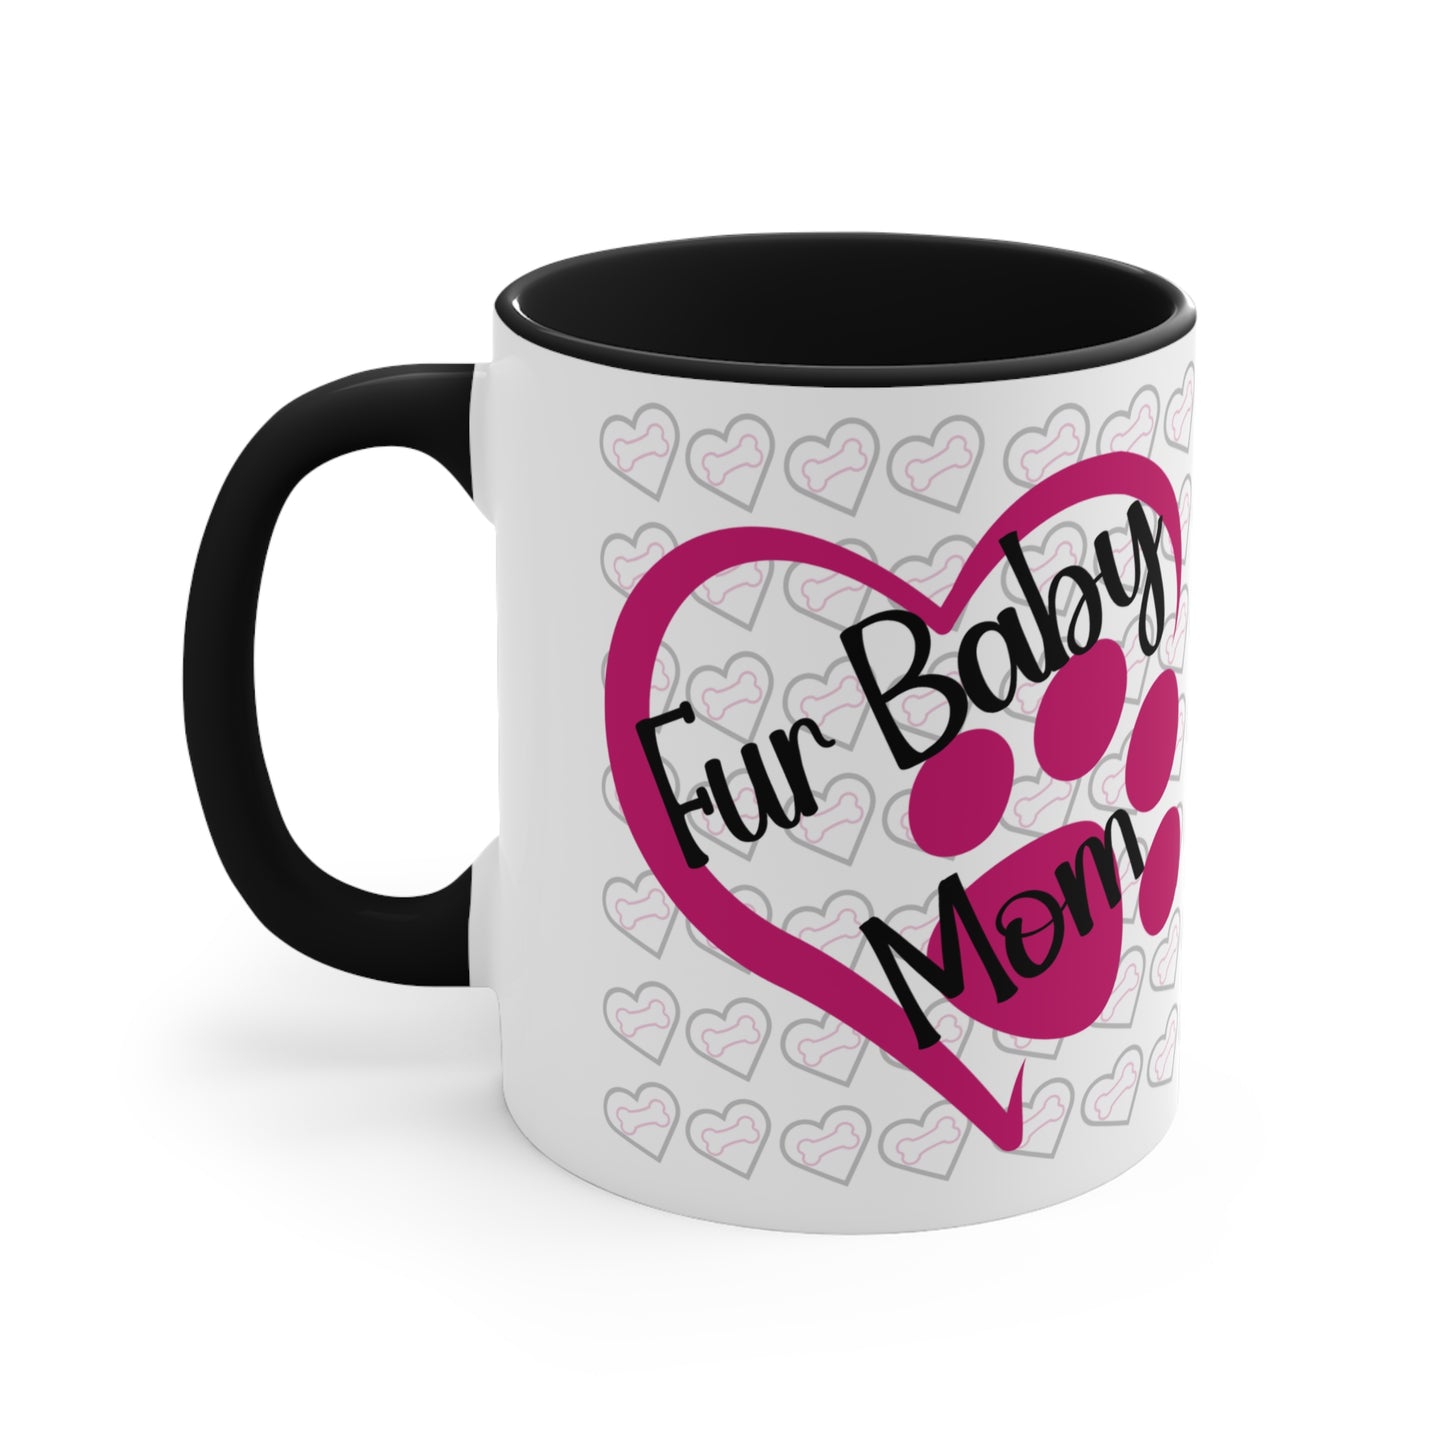 Fur baby mom coffee mug with pink heart and paw print 11 oz, back view in black.